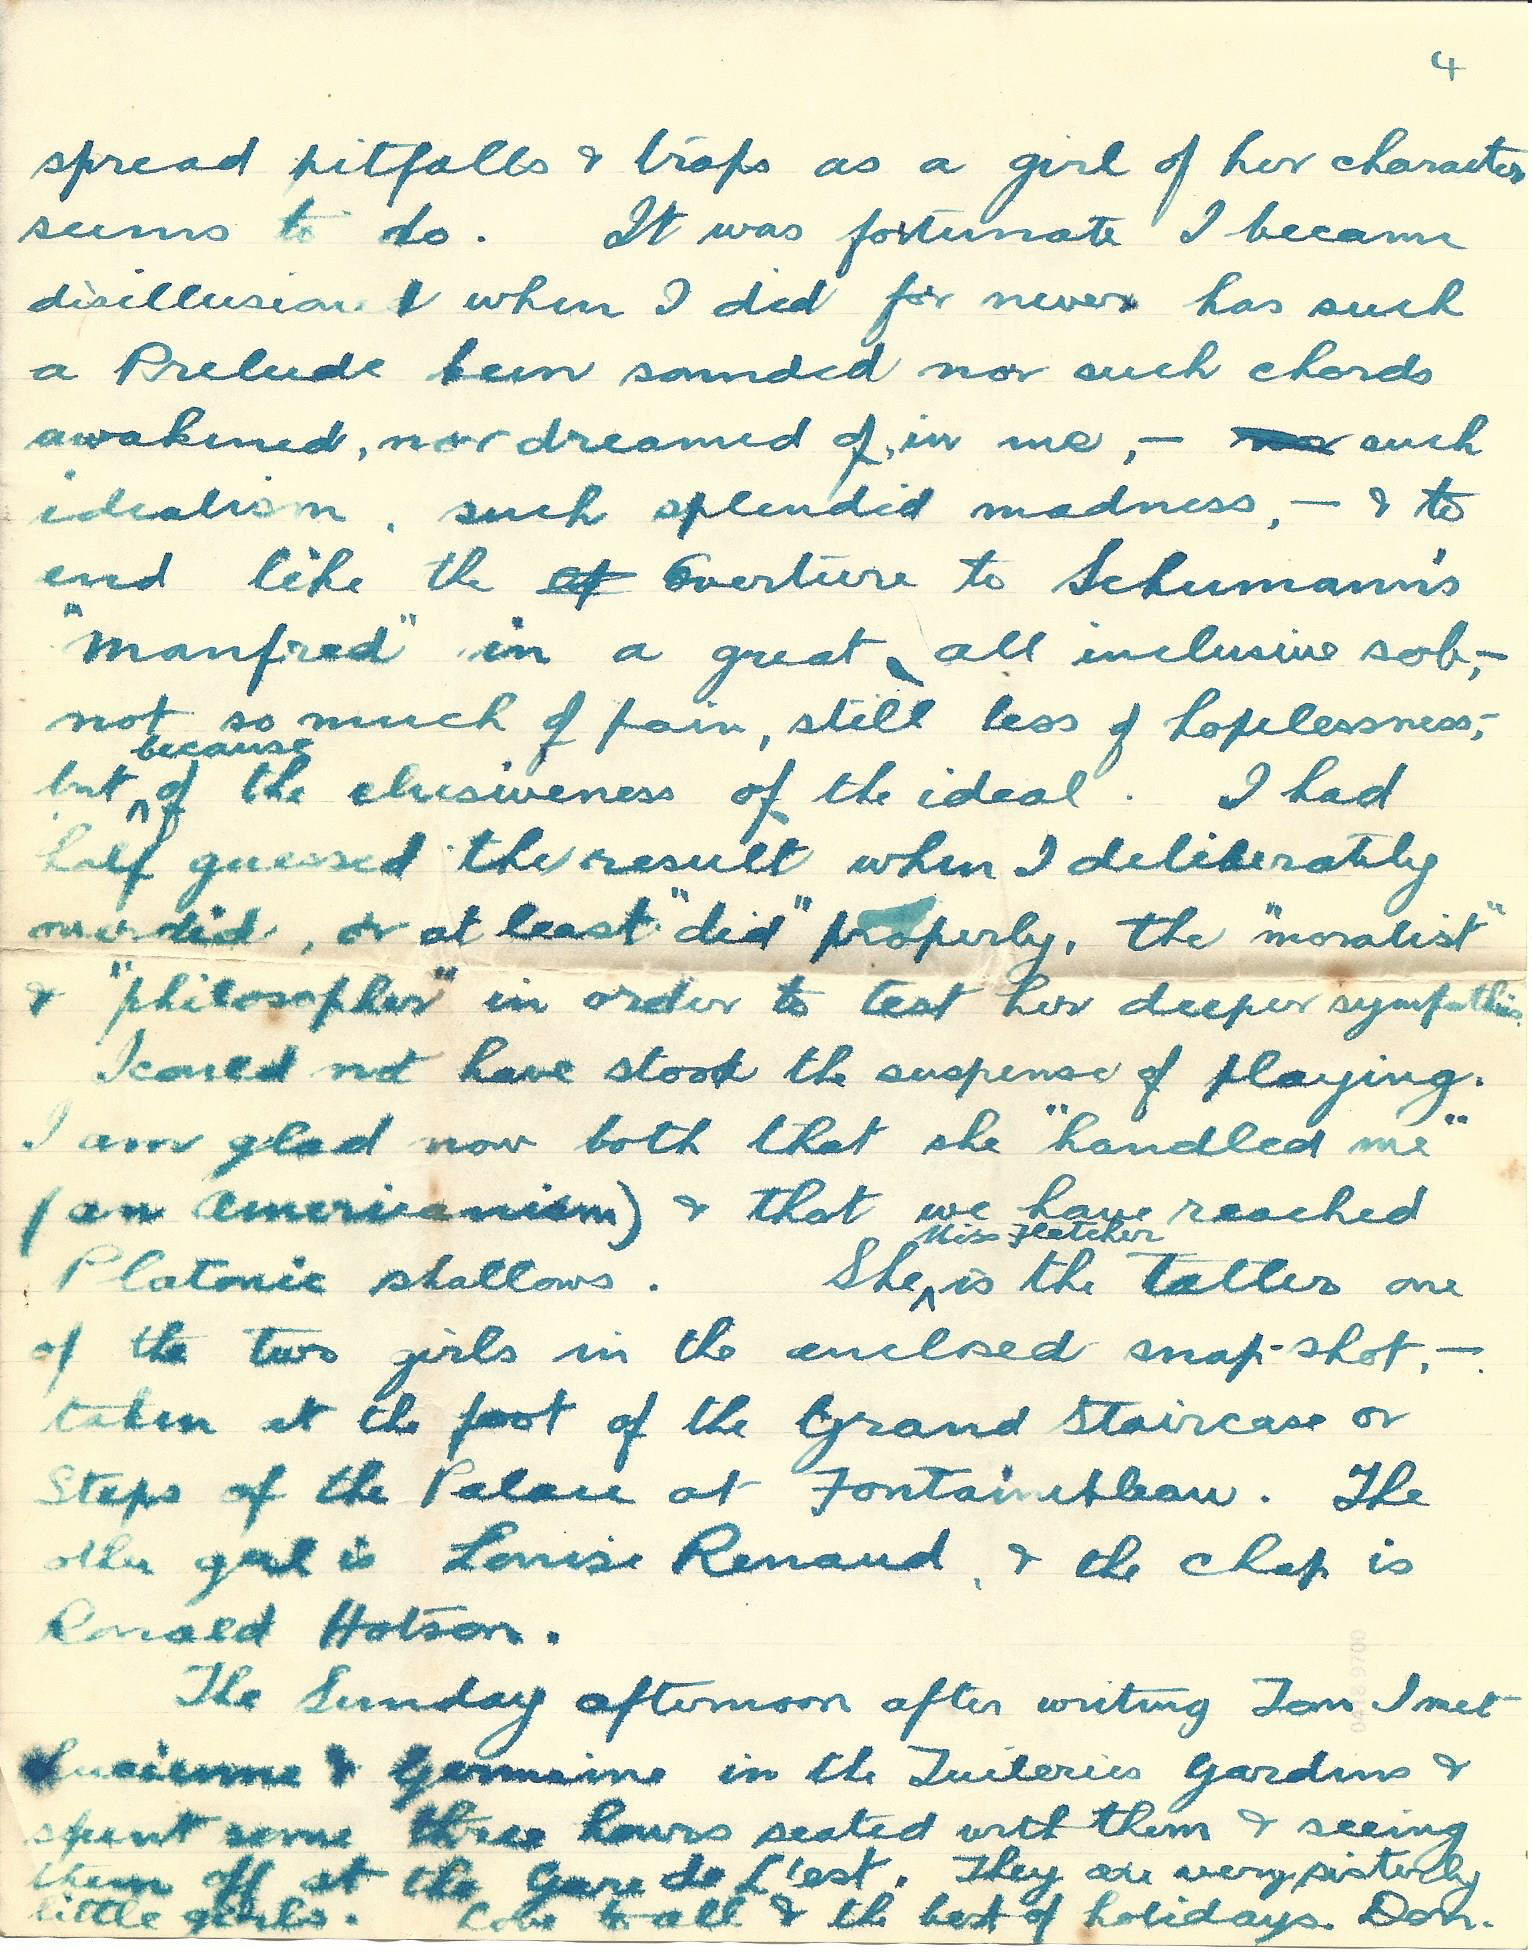 1919-09-08 p4 Donald Bearman letter to his mother